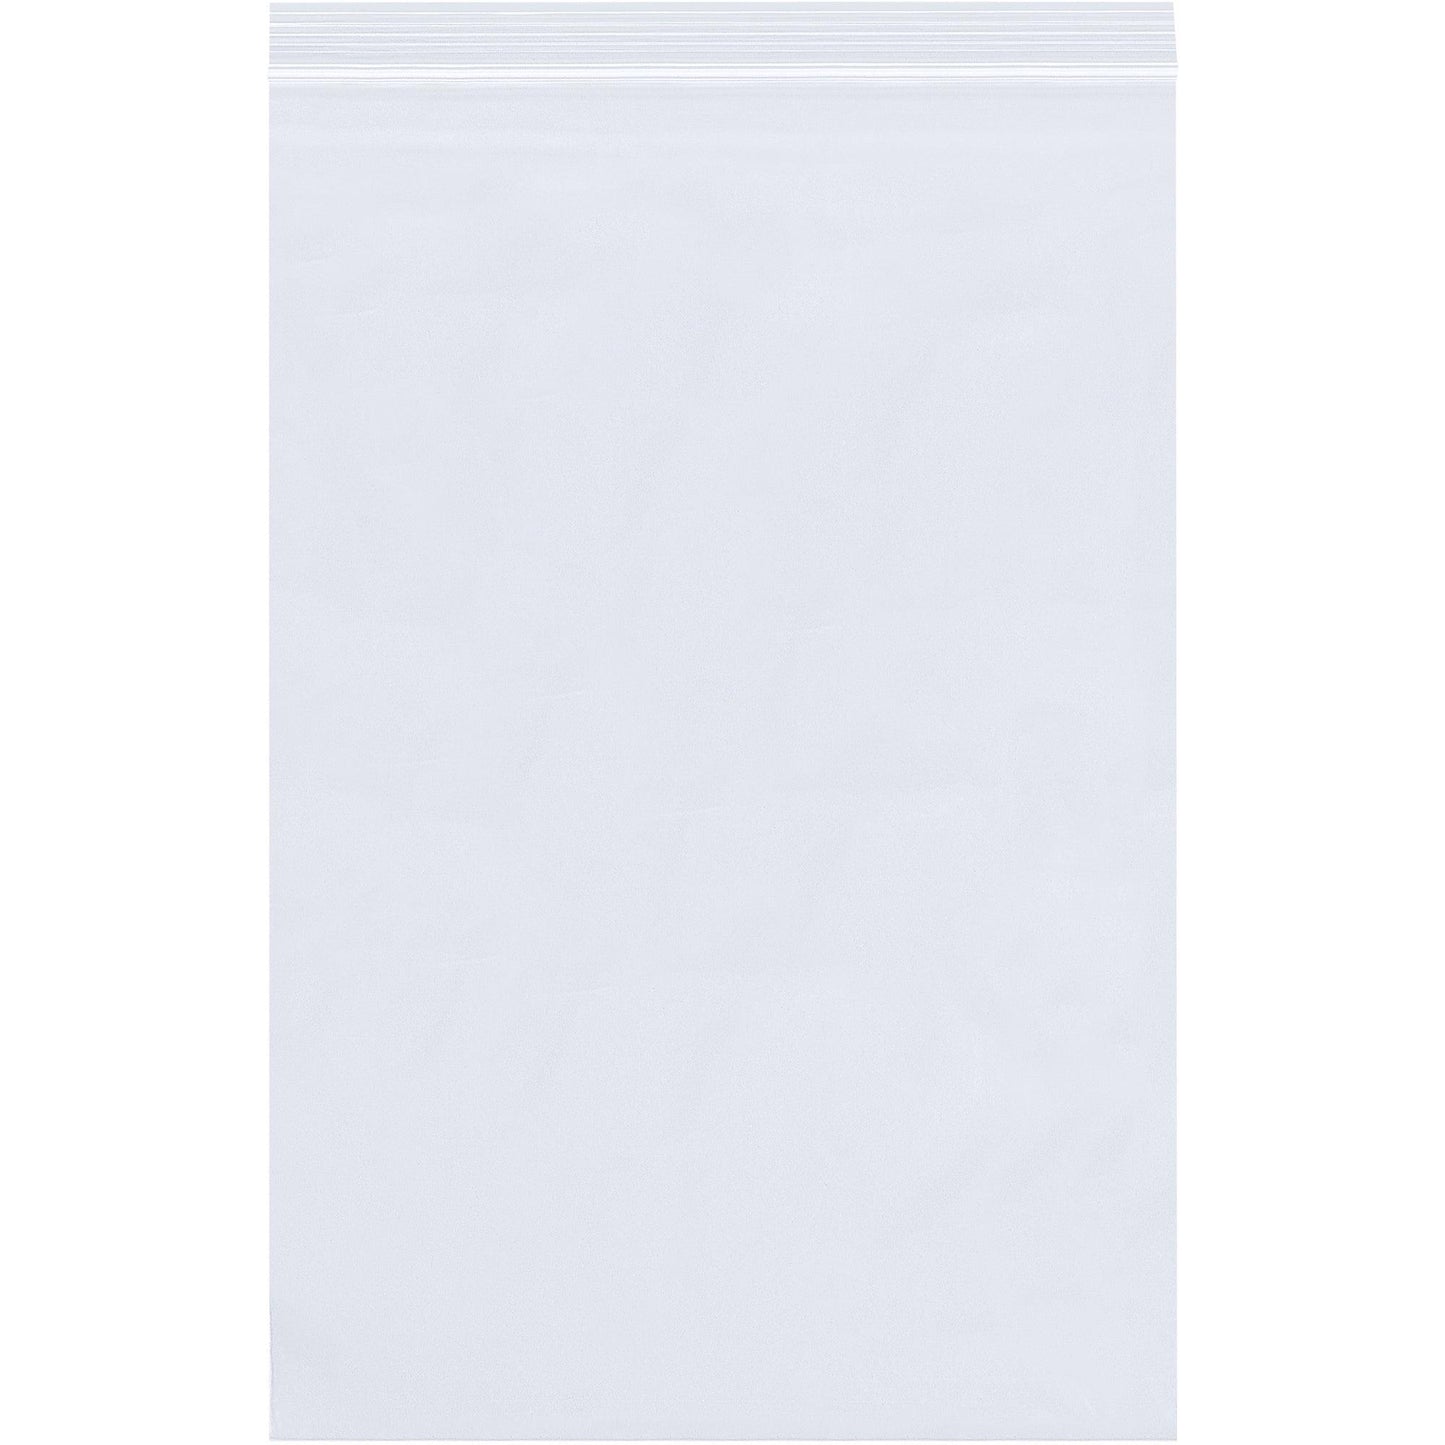 12 x 13" - 2 Mil Reclosable Poly Bags - PB3666